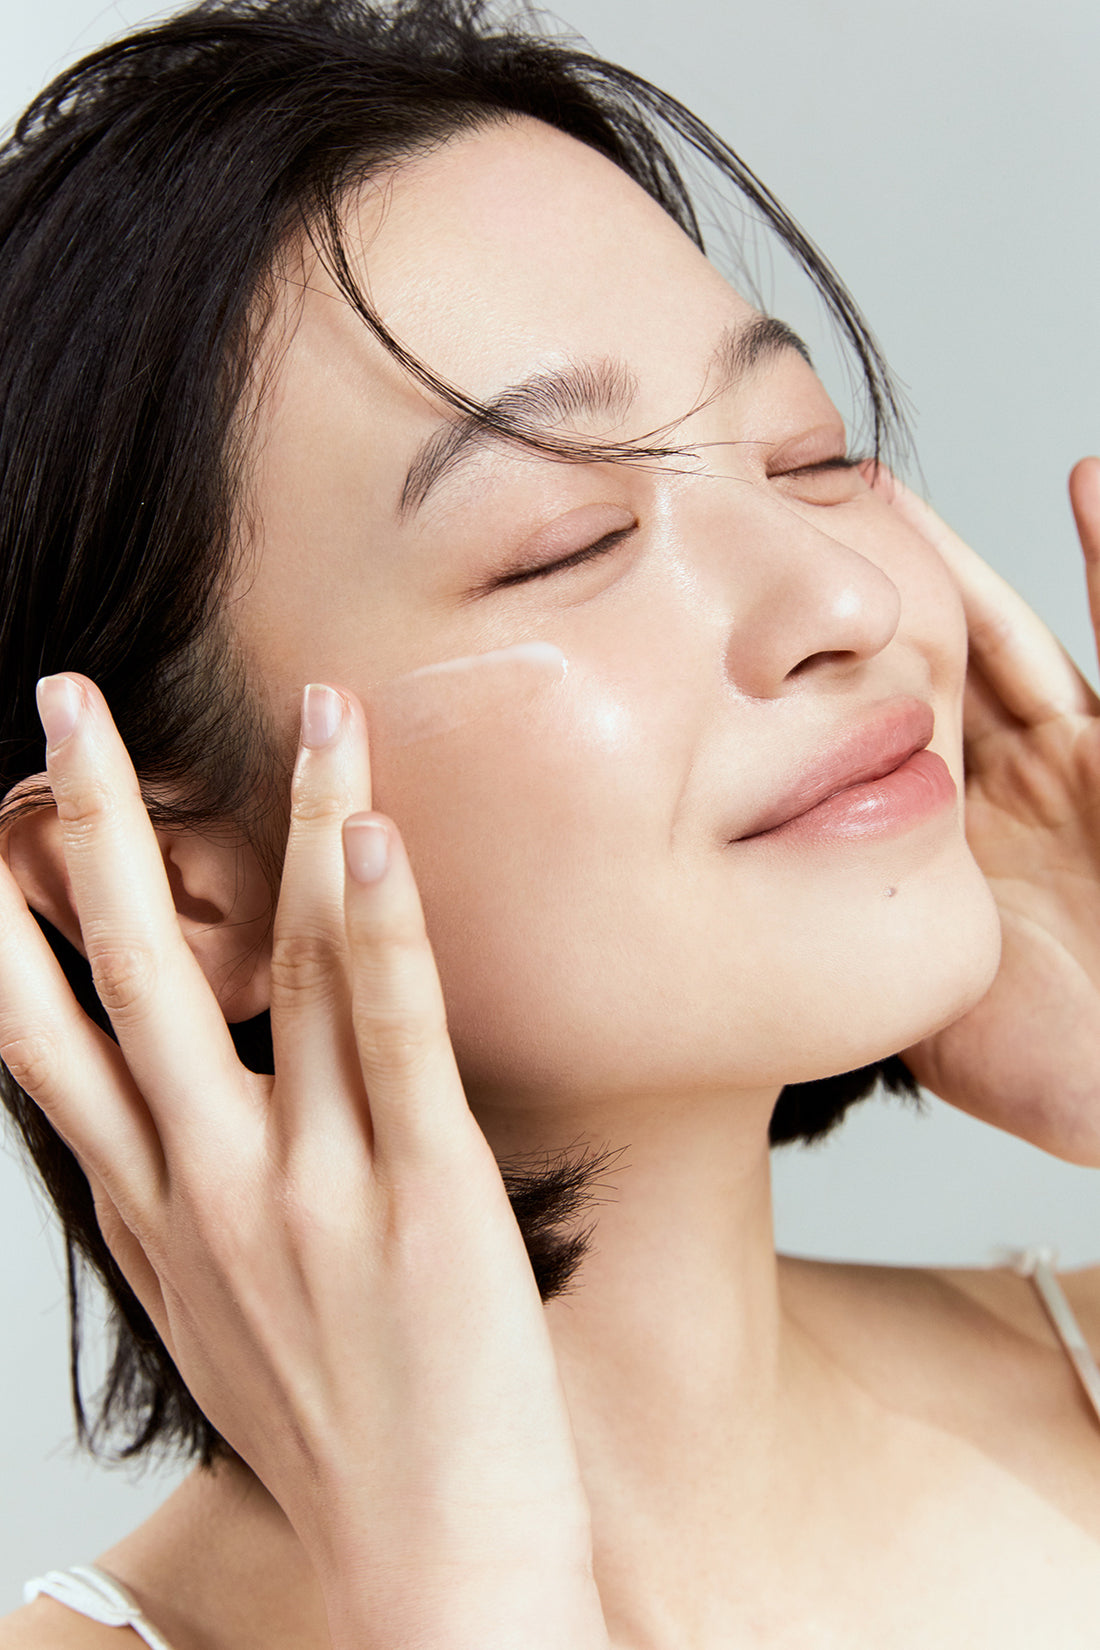 Why does autumn skin accelerate aging?